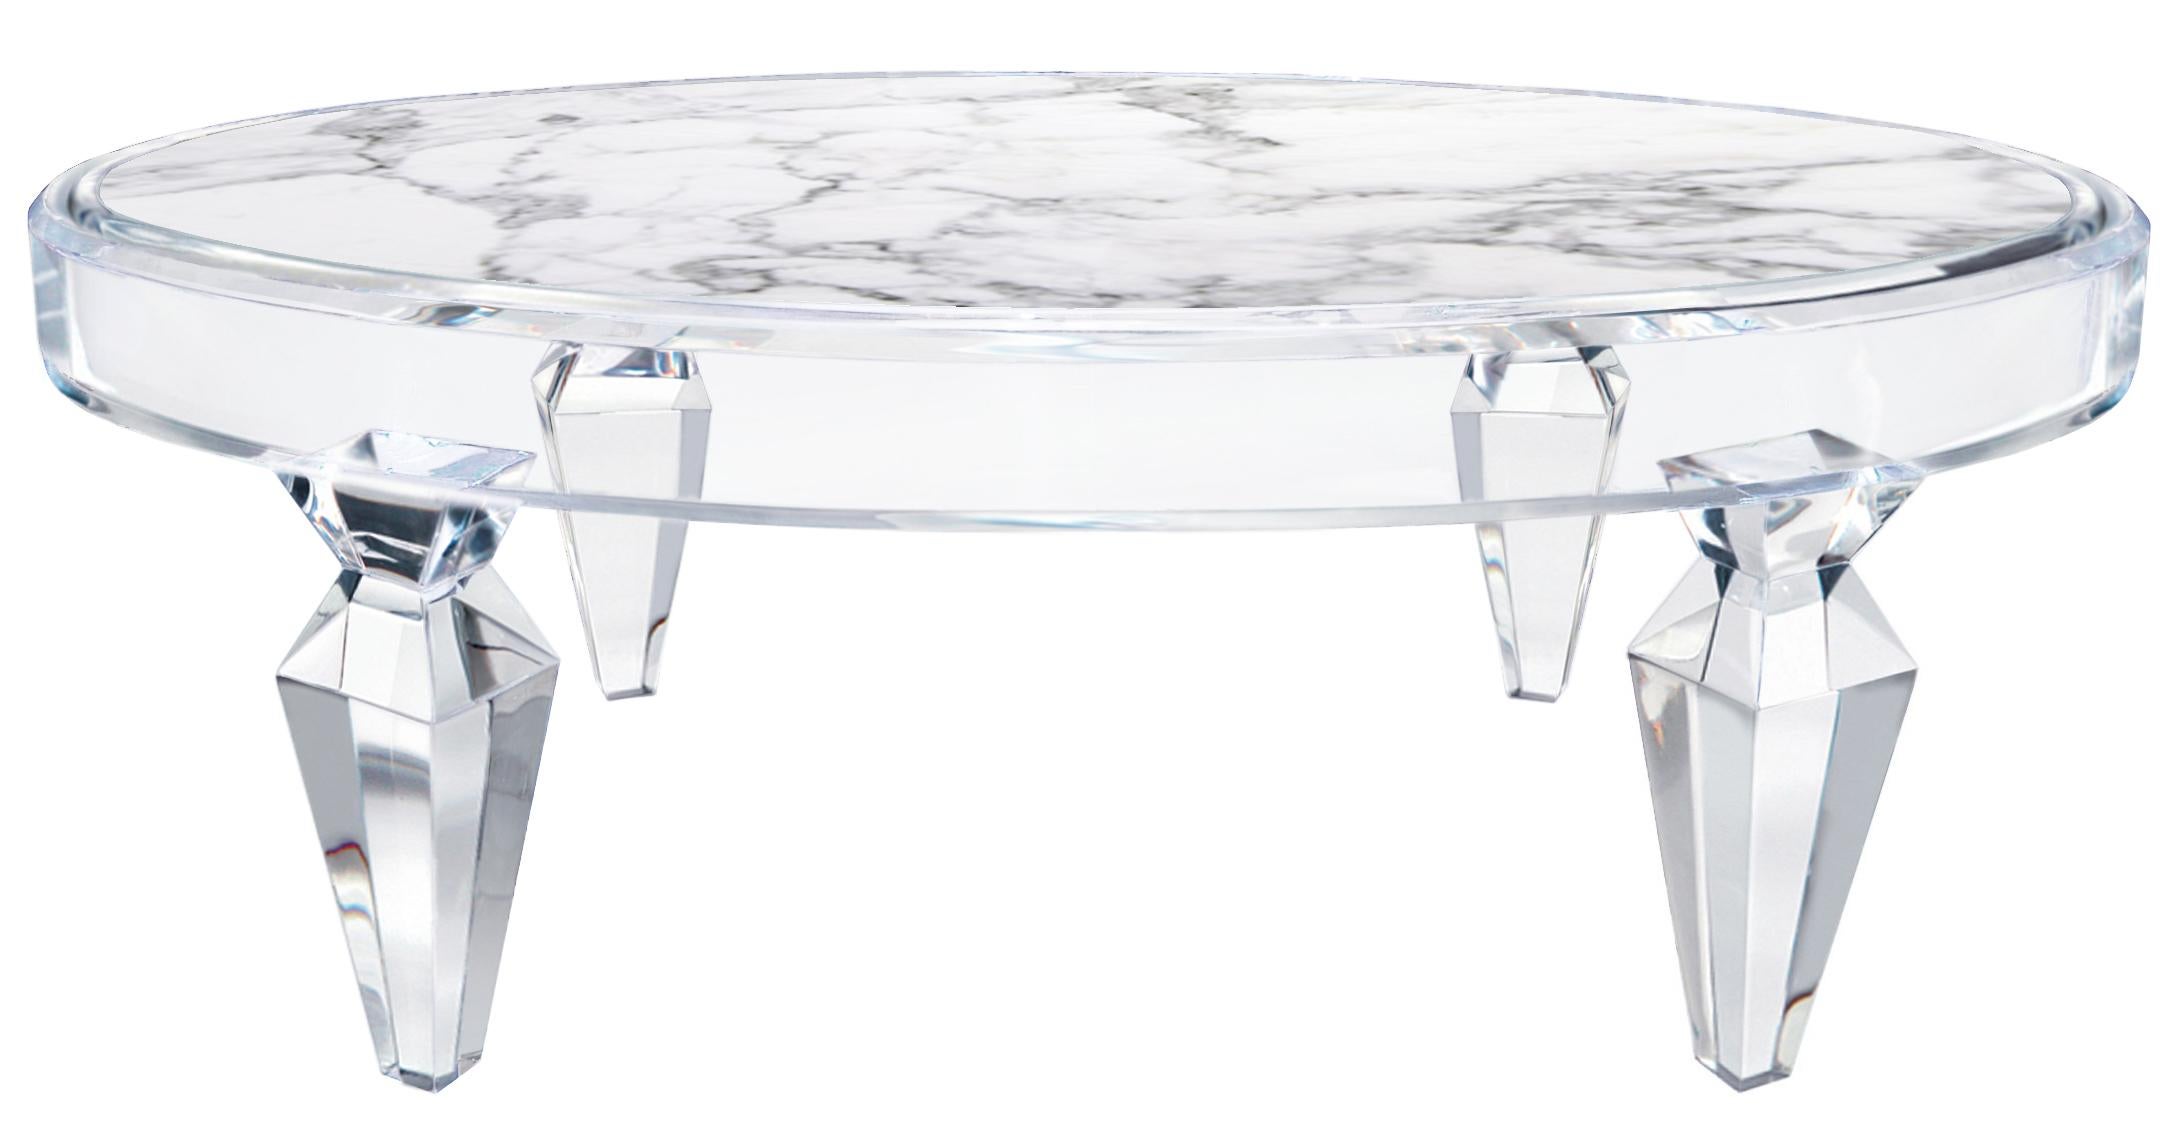 Lucere Lucite Side table with mirrored drawer by Craig Van Den Brulle.

Custom Sizes Are Available.